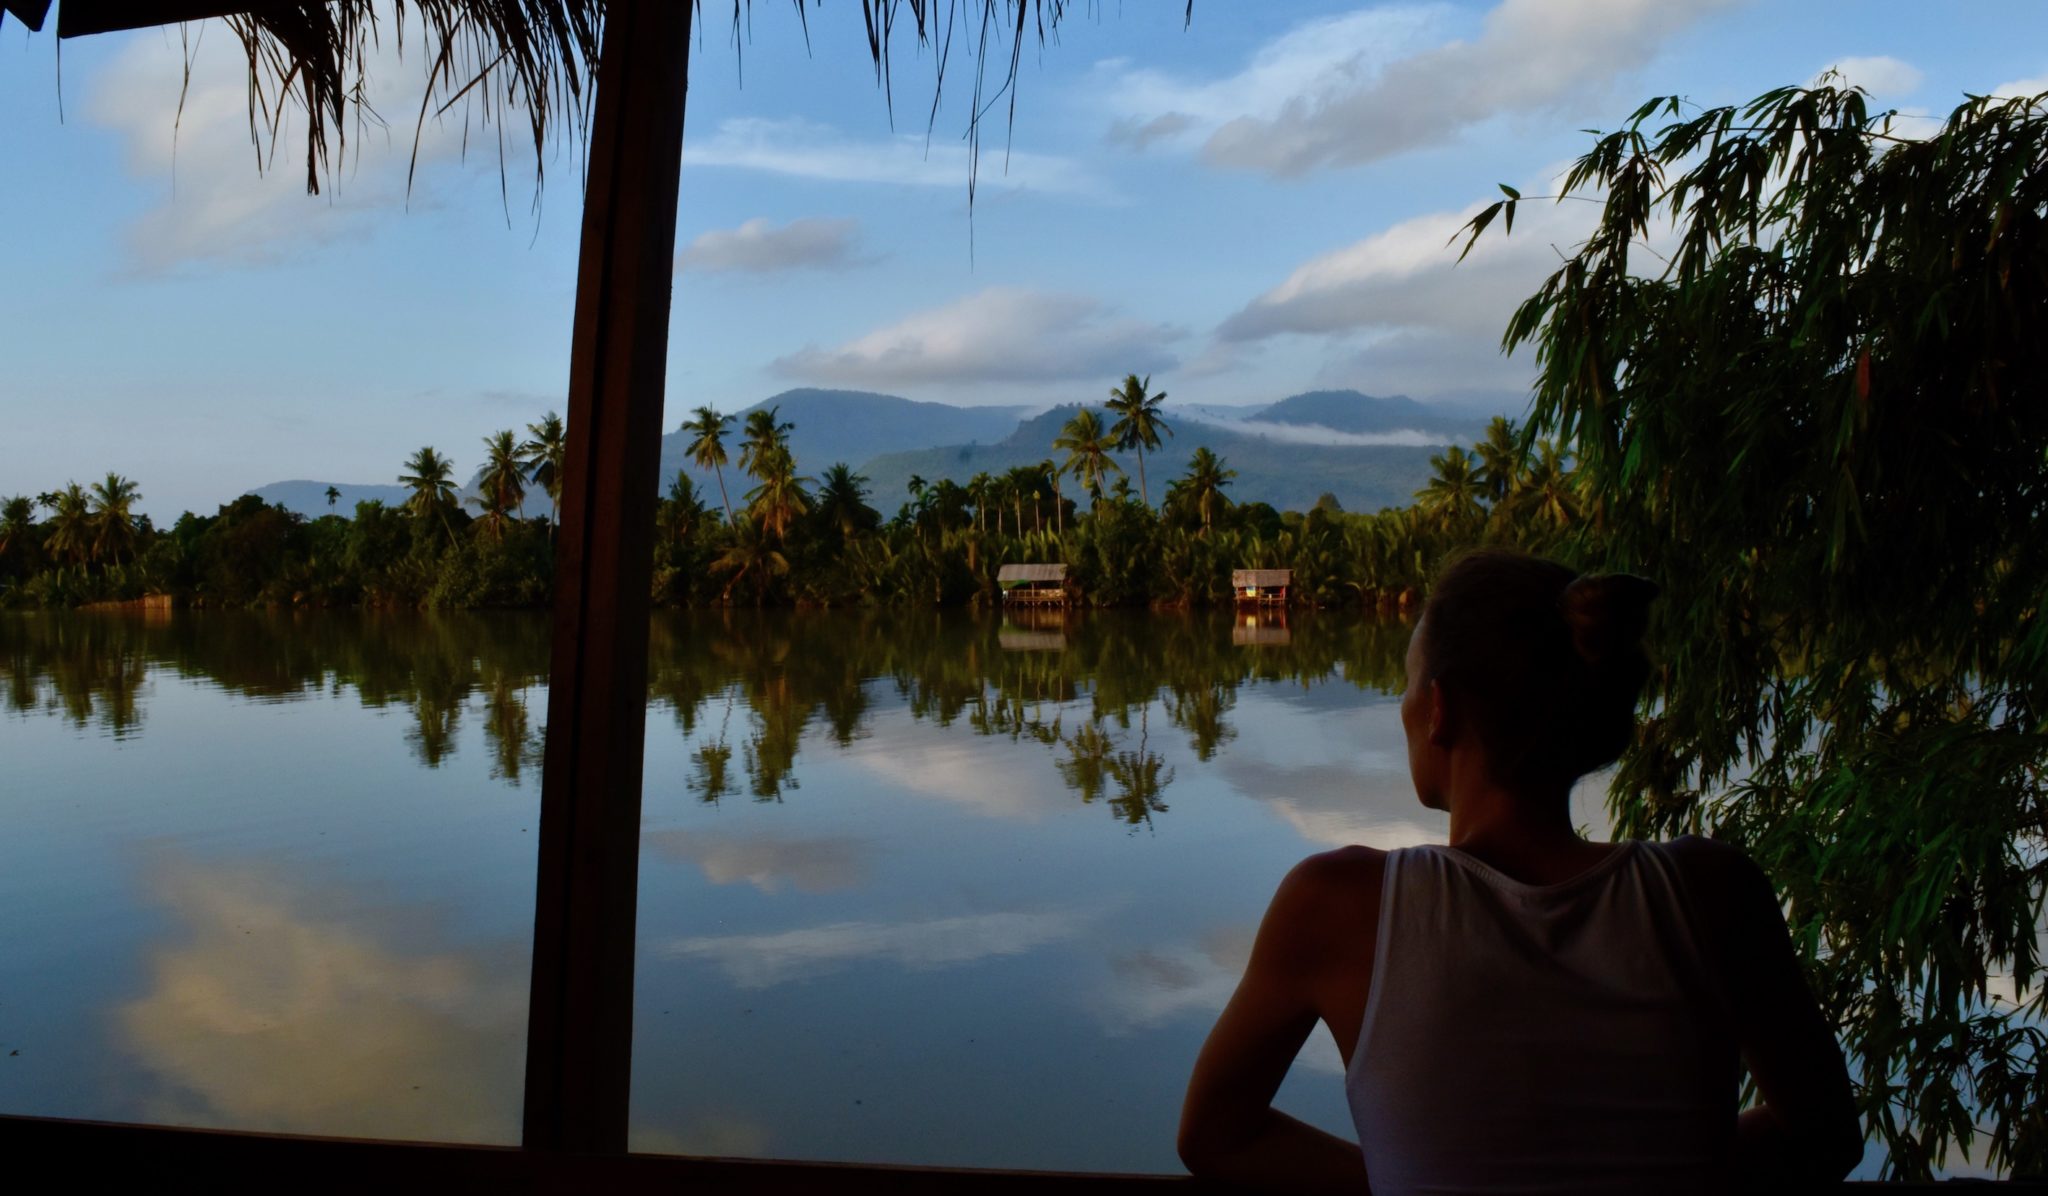 Views over the river in Kampot